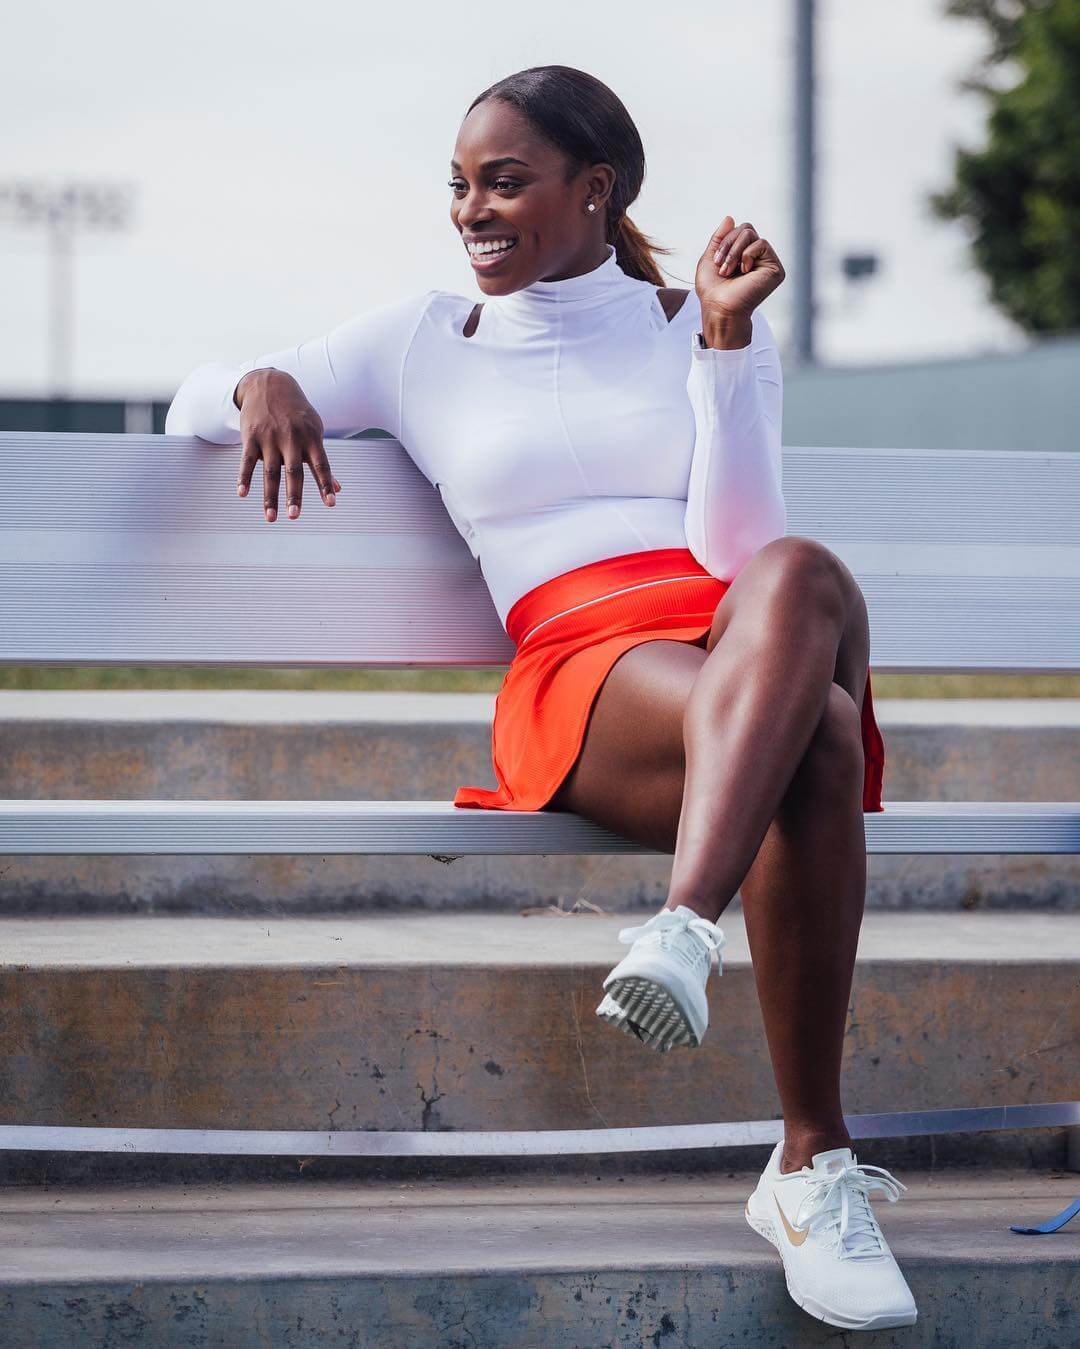 49 Hot Pictures Of Sloane Stephens Will Make You Fall In Love Instantly | Best Of Comic Books